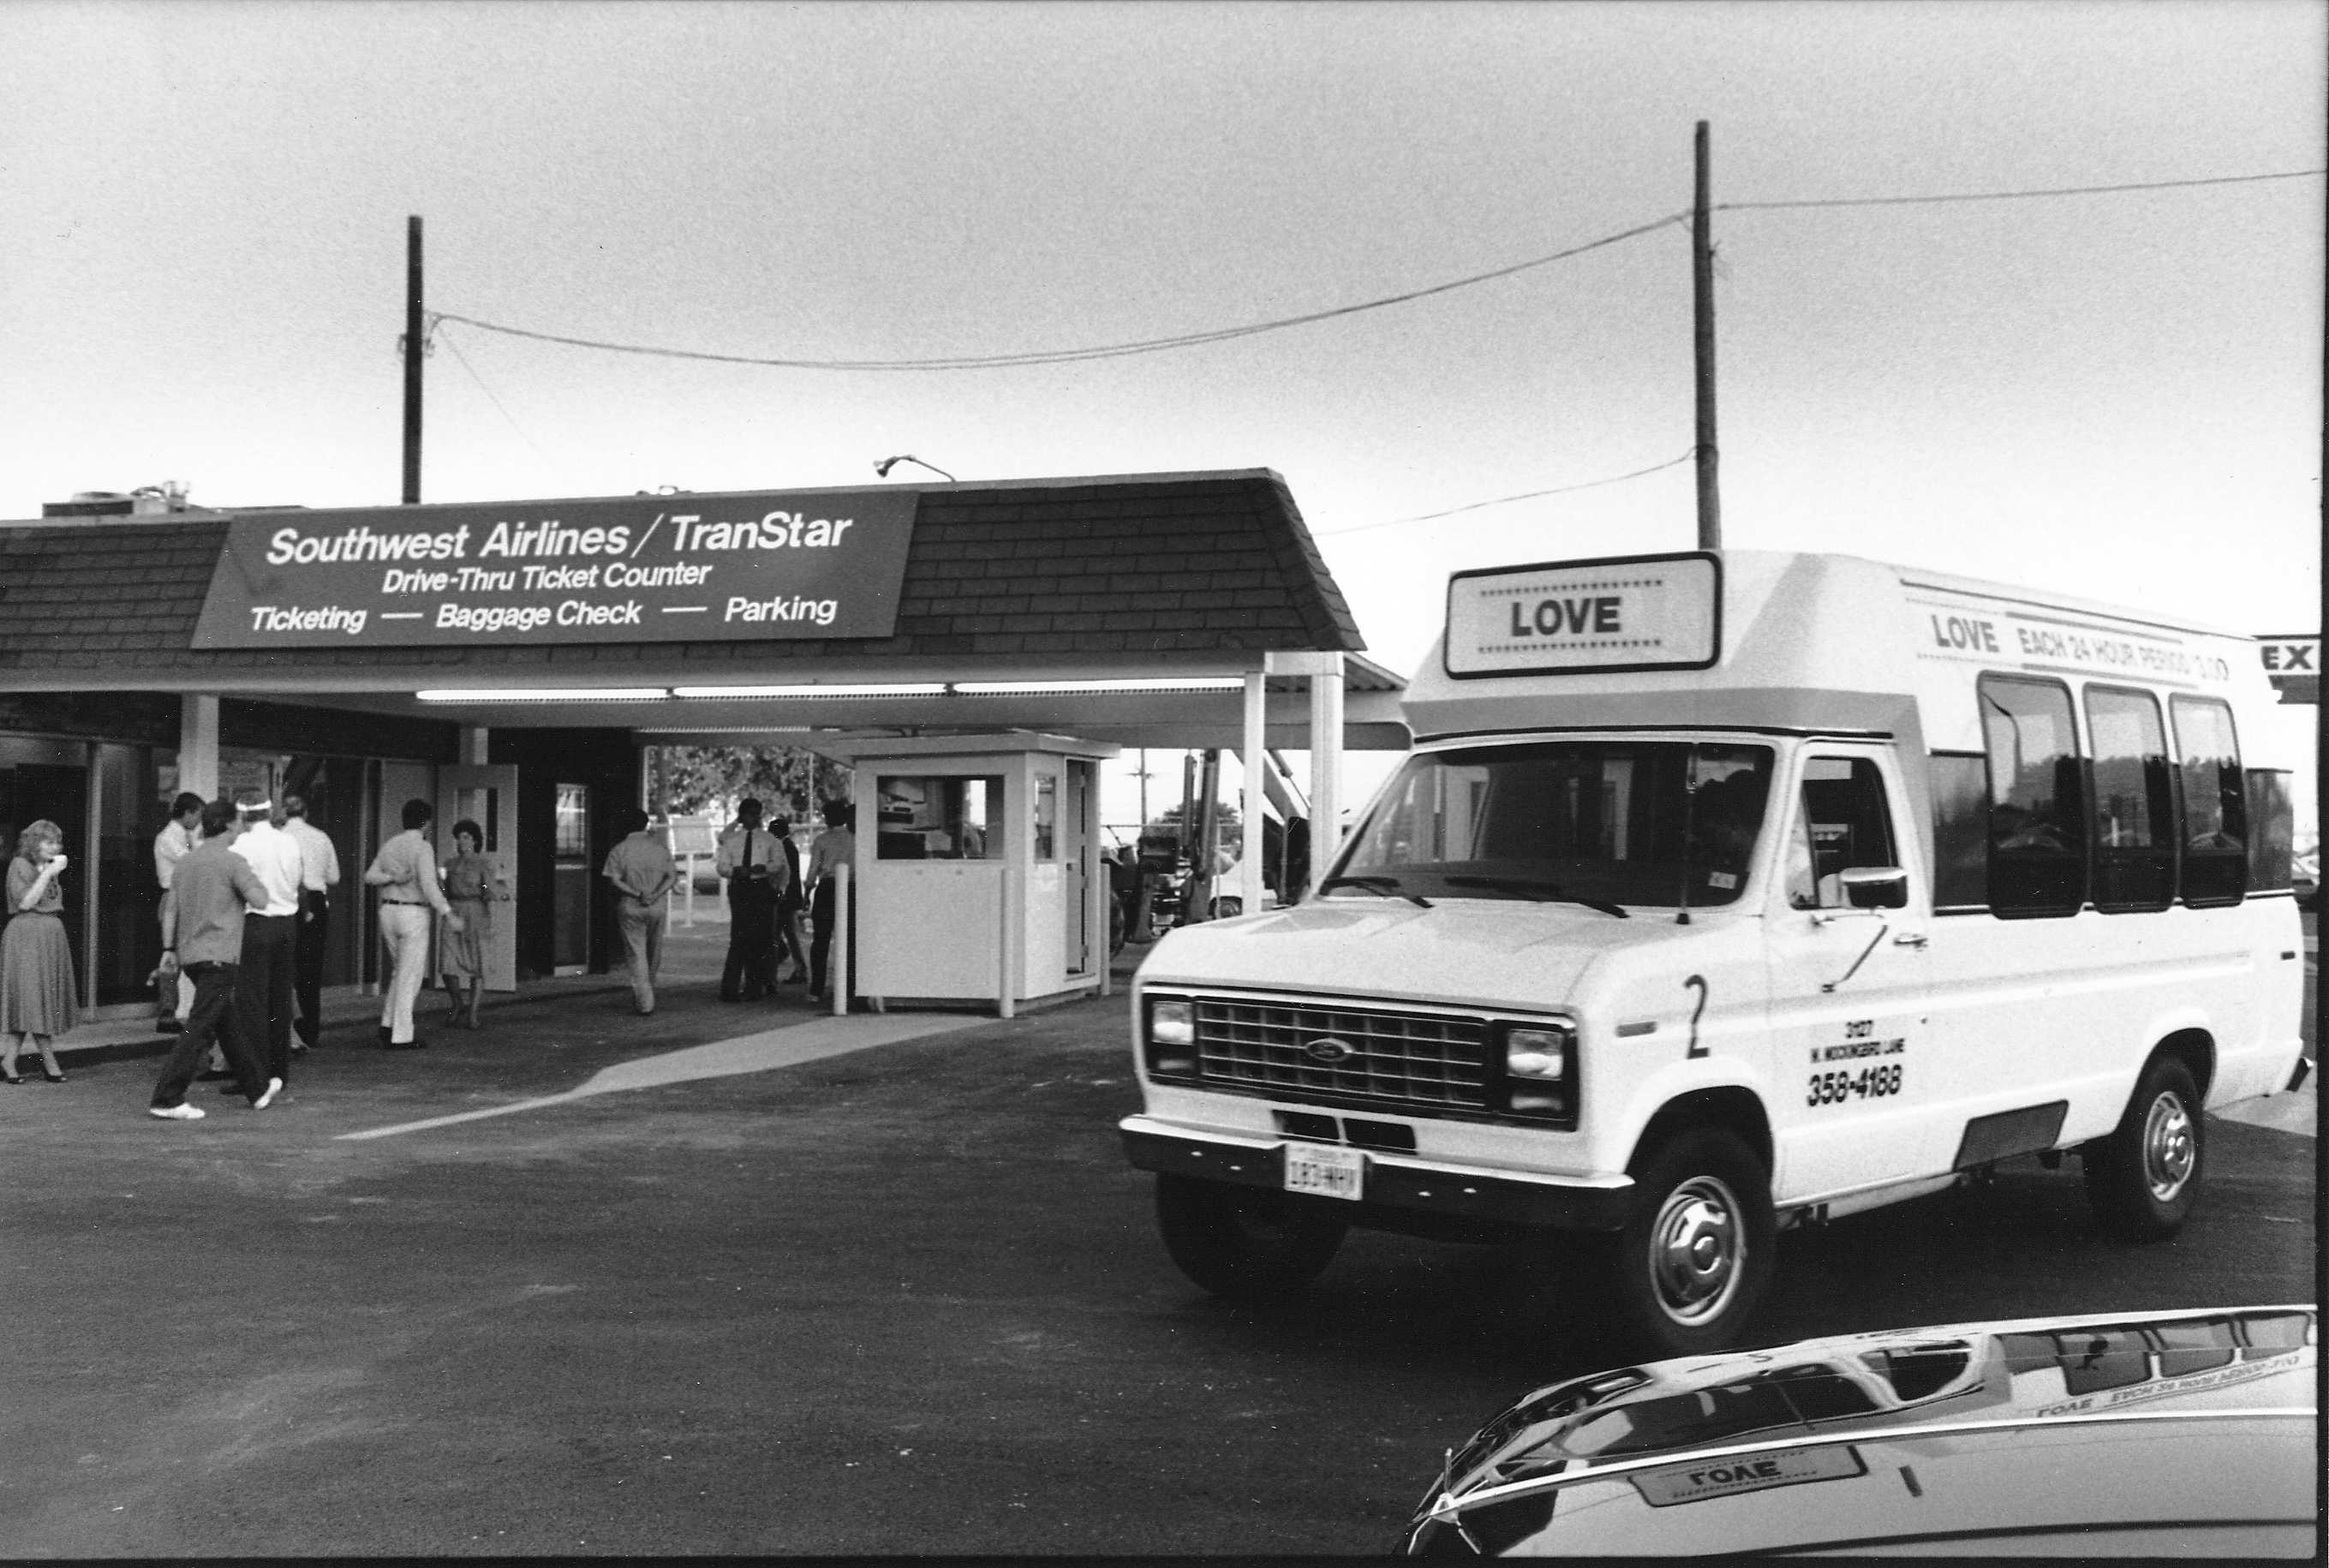 Flashhback Friday DriveThru Ticket Counter The Southwest Airlines